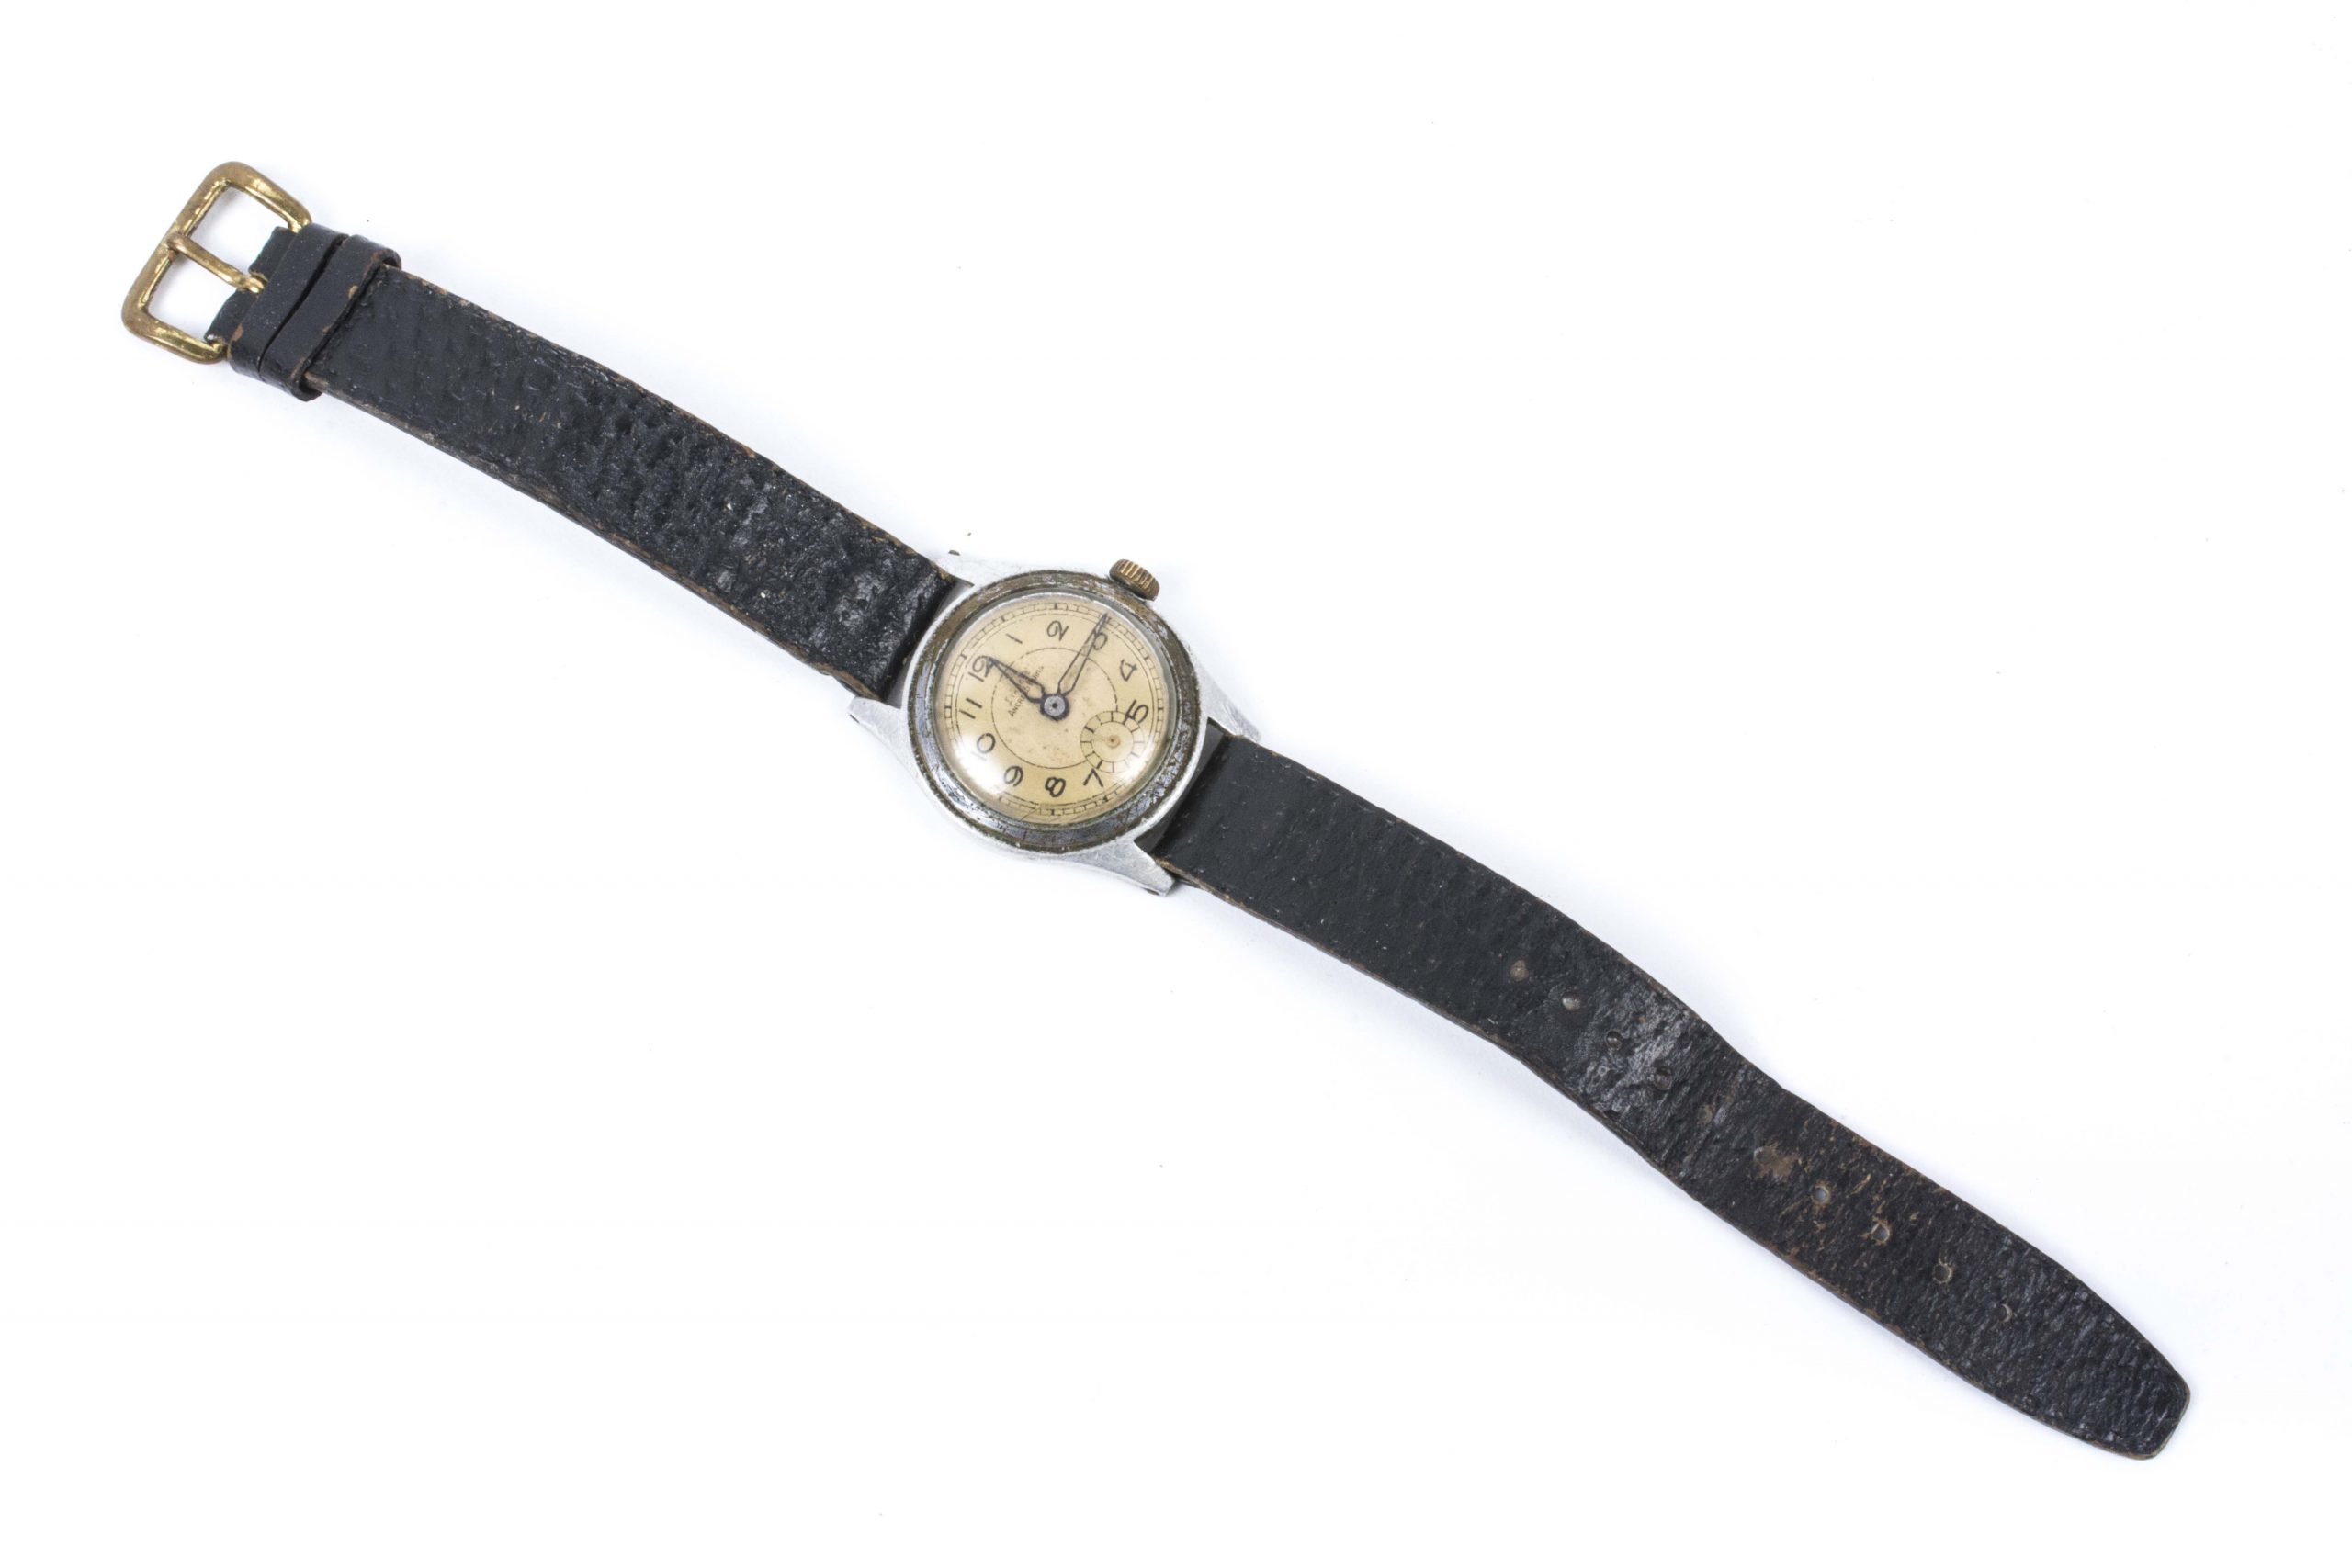 French private purchase period wristwatch – fjm44